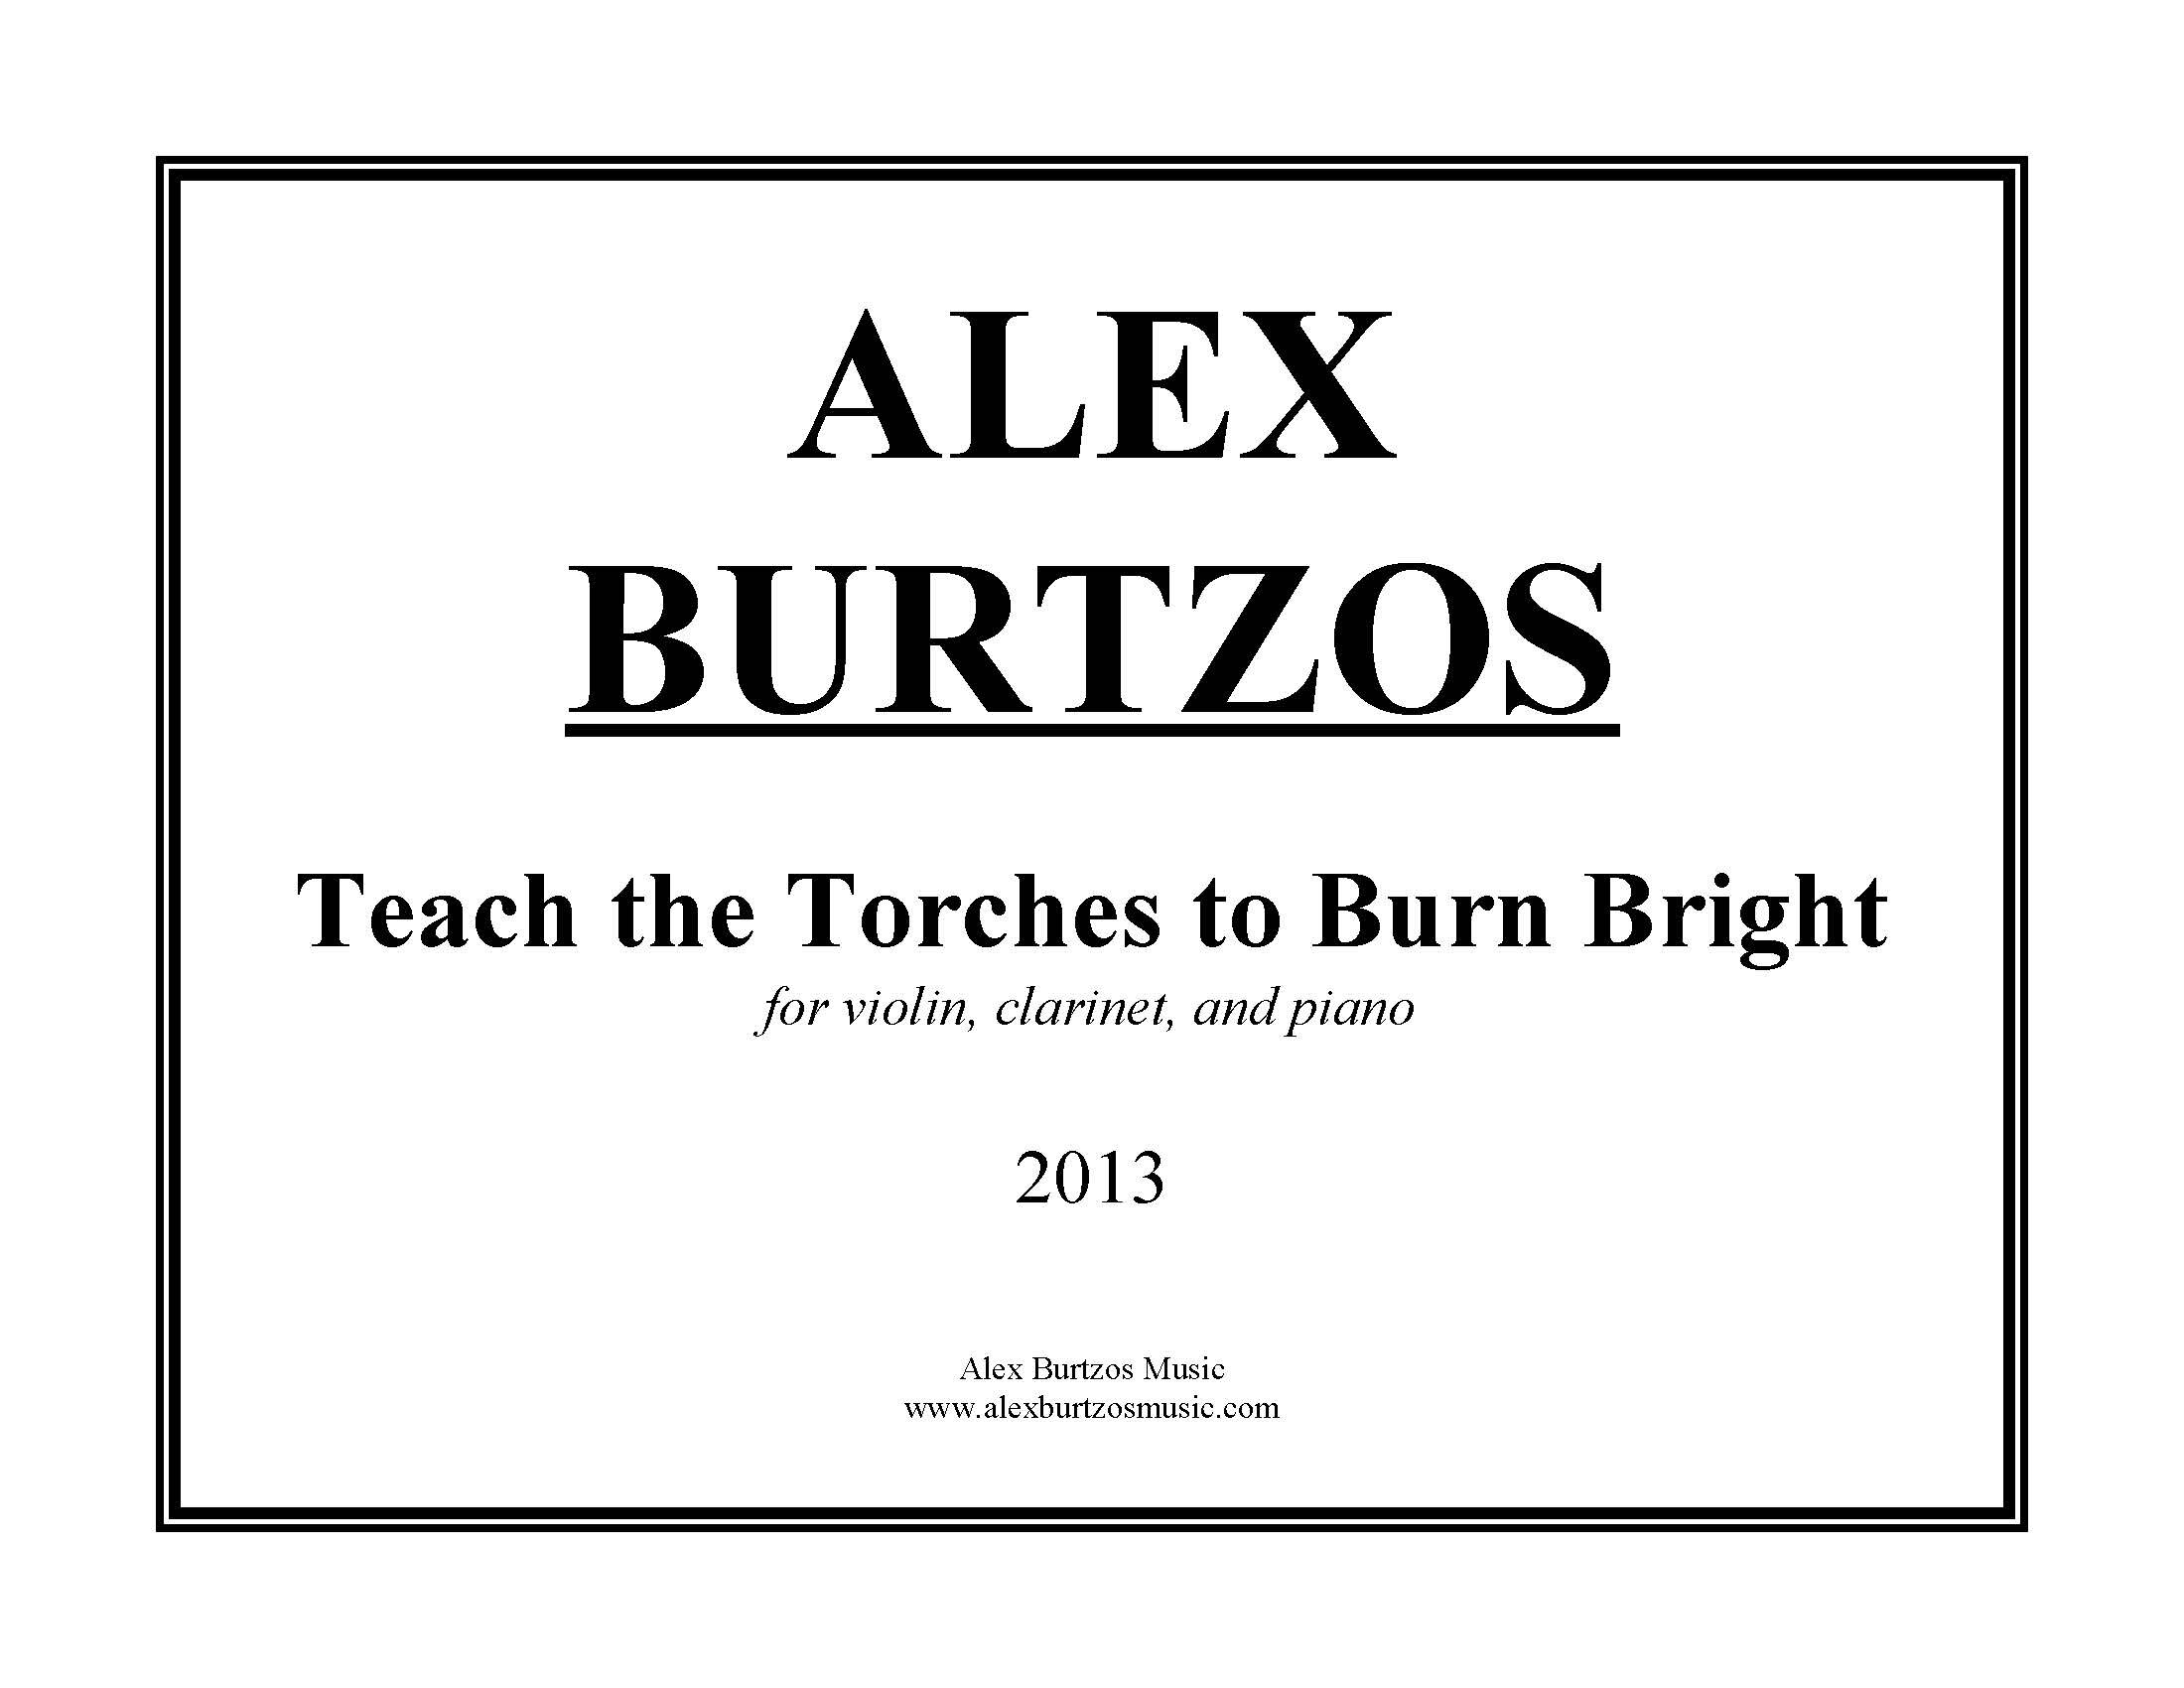 Teach the Torches to Burn Bright - Complete Score_Page_01.jpg